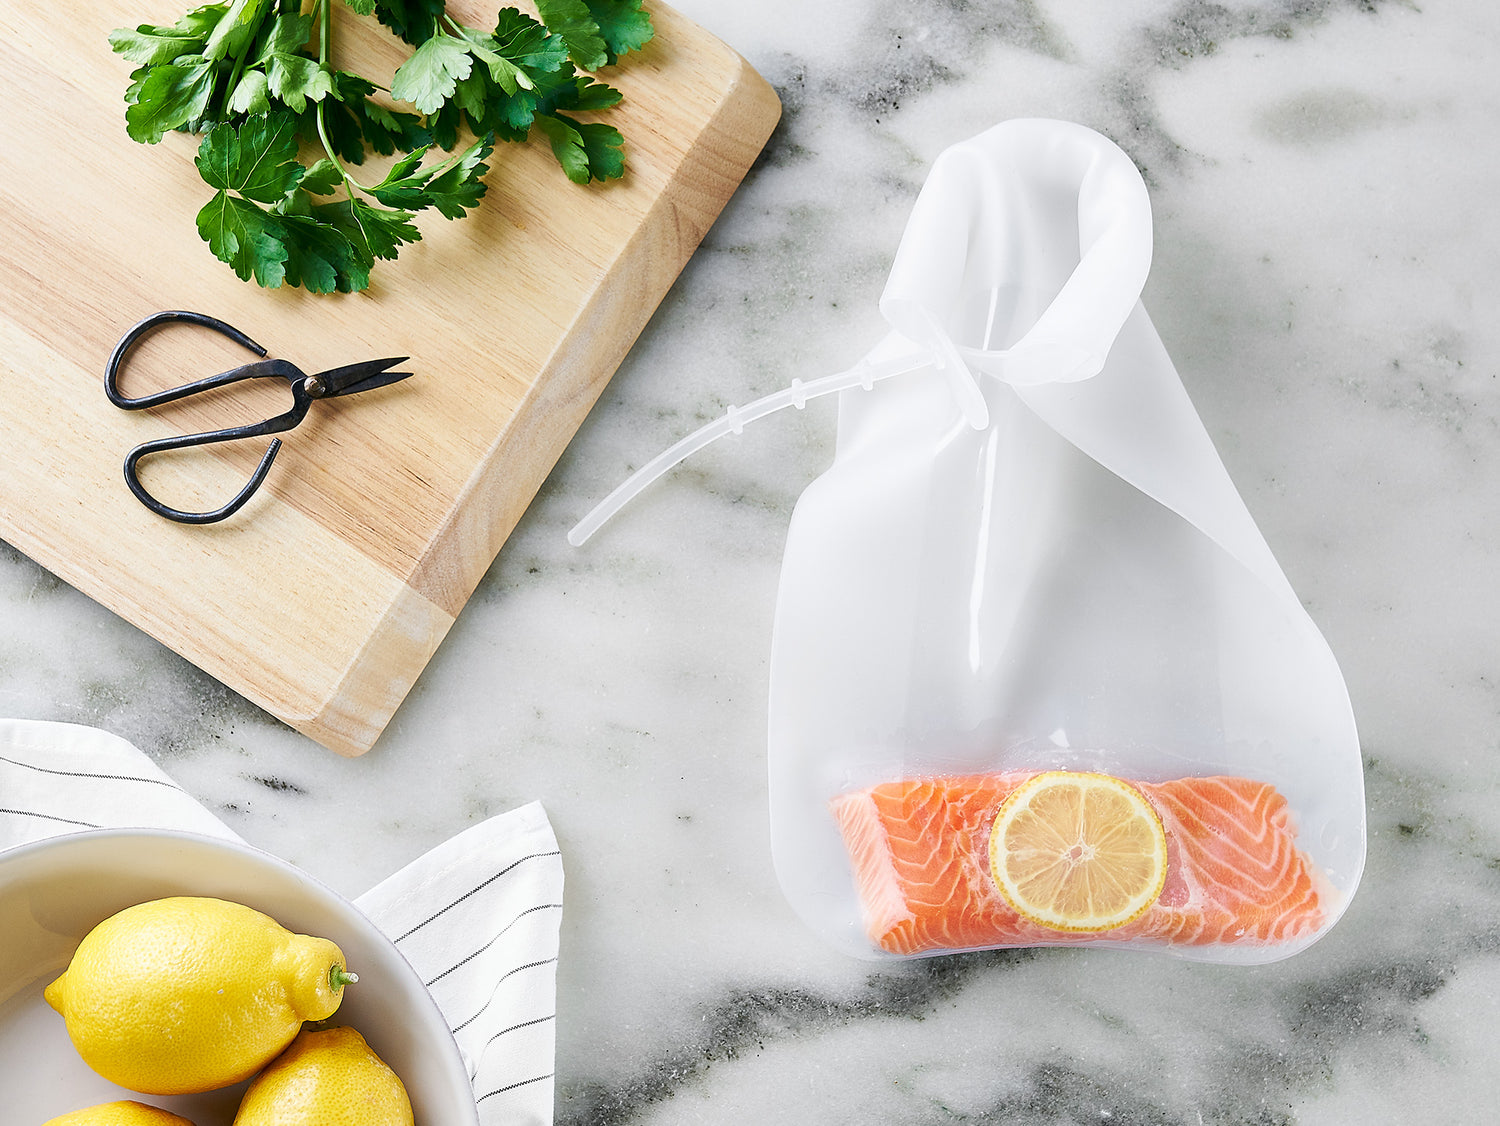 Thoughts on the new Anova Reusable Silicone Bag? : r/sousvide